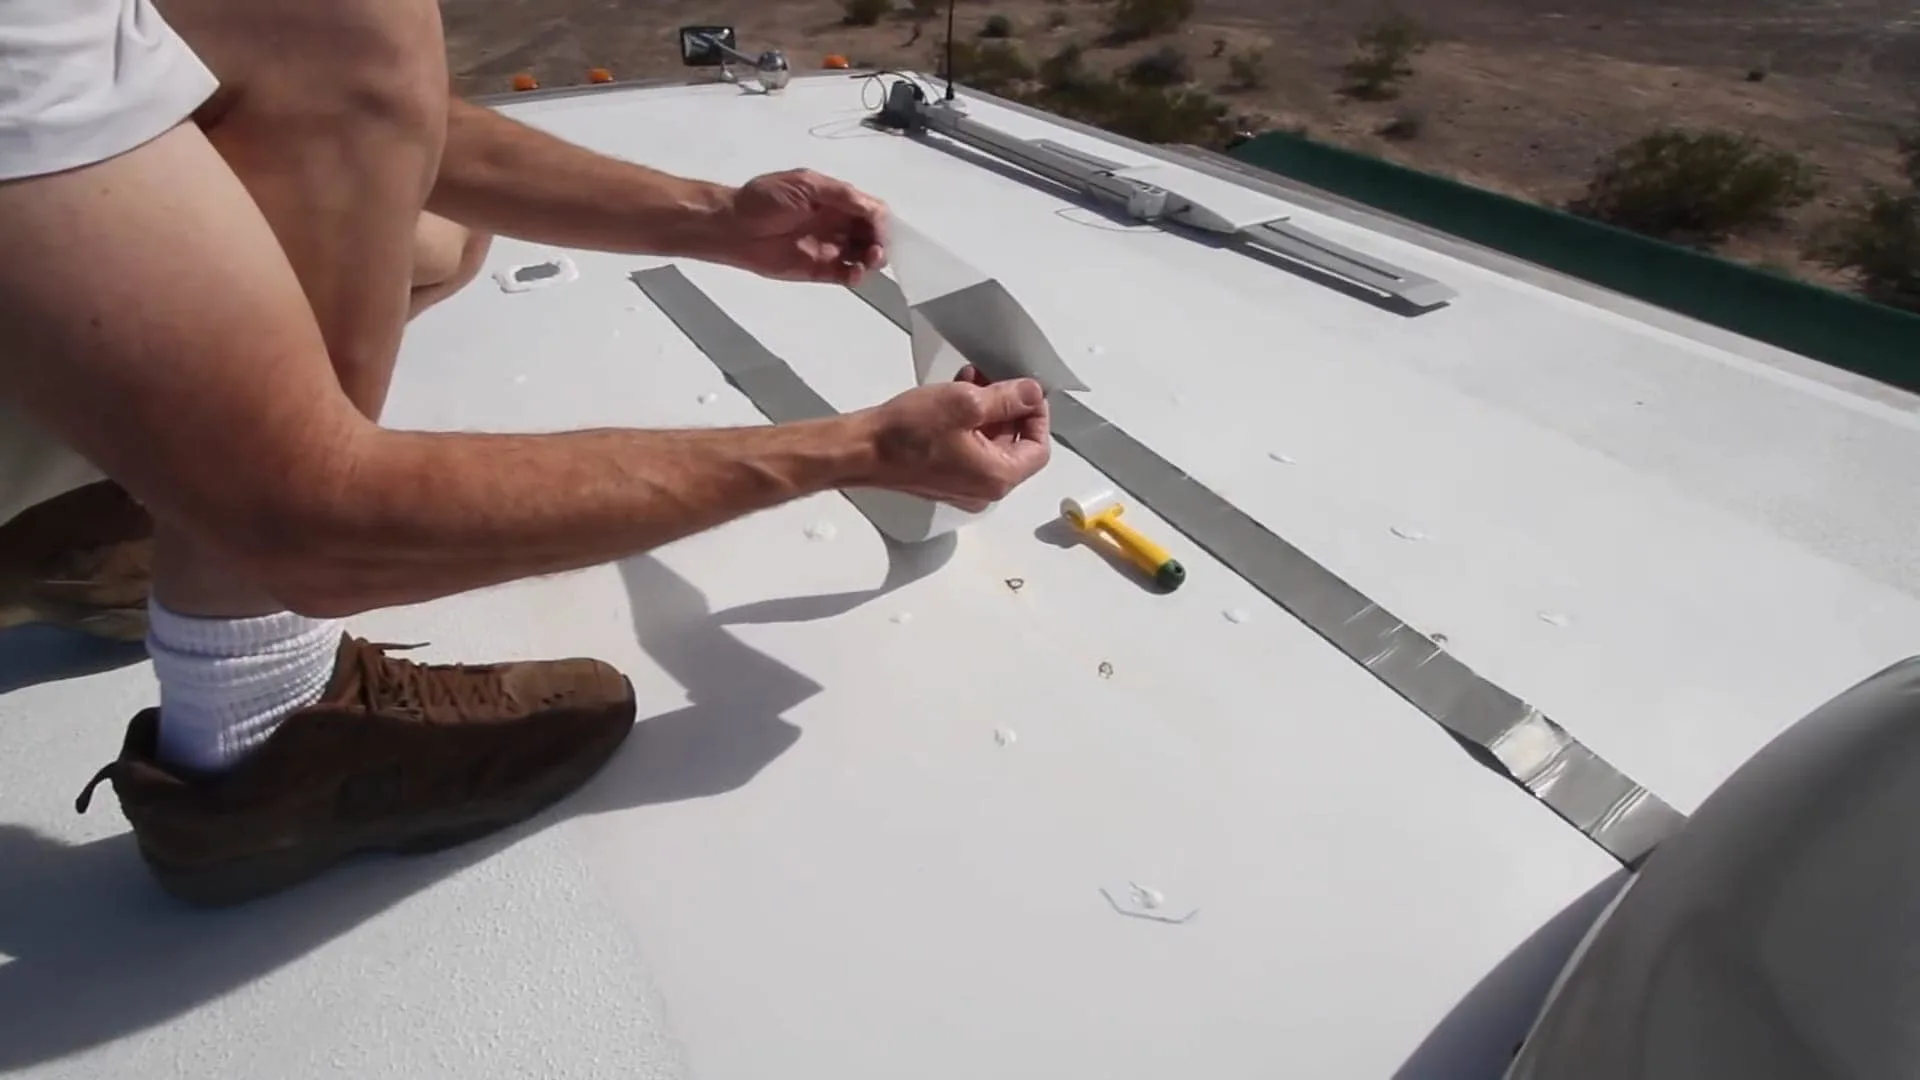 Eternabond tape can repair minor damage to an RV roof.